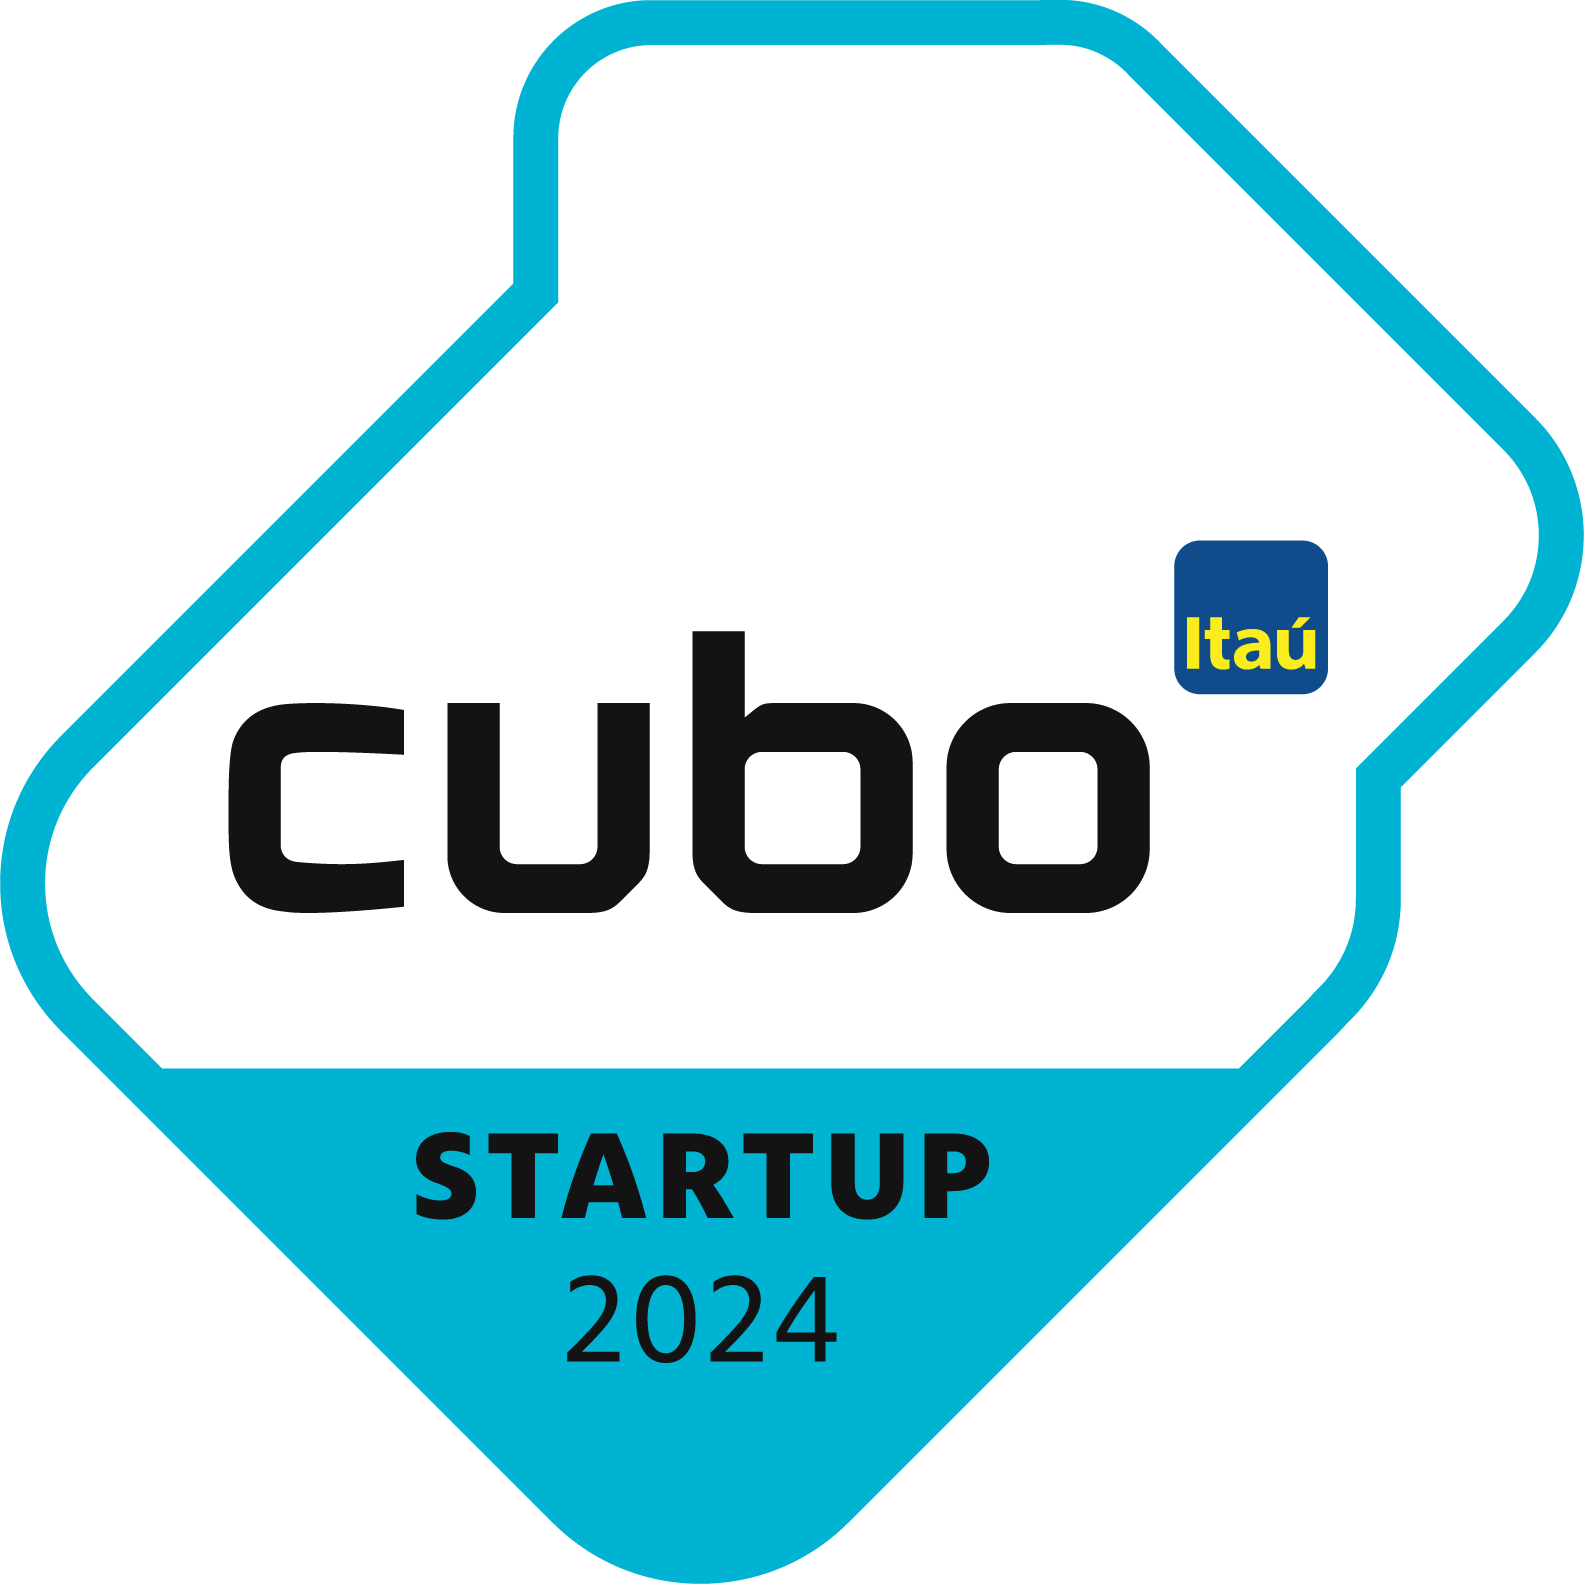 Cubo Startup 2024